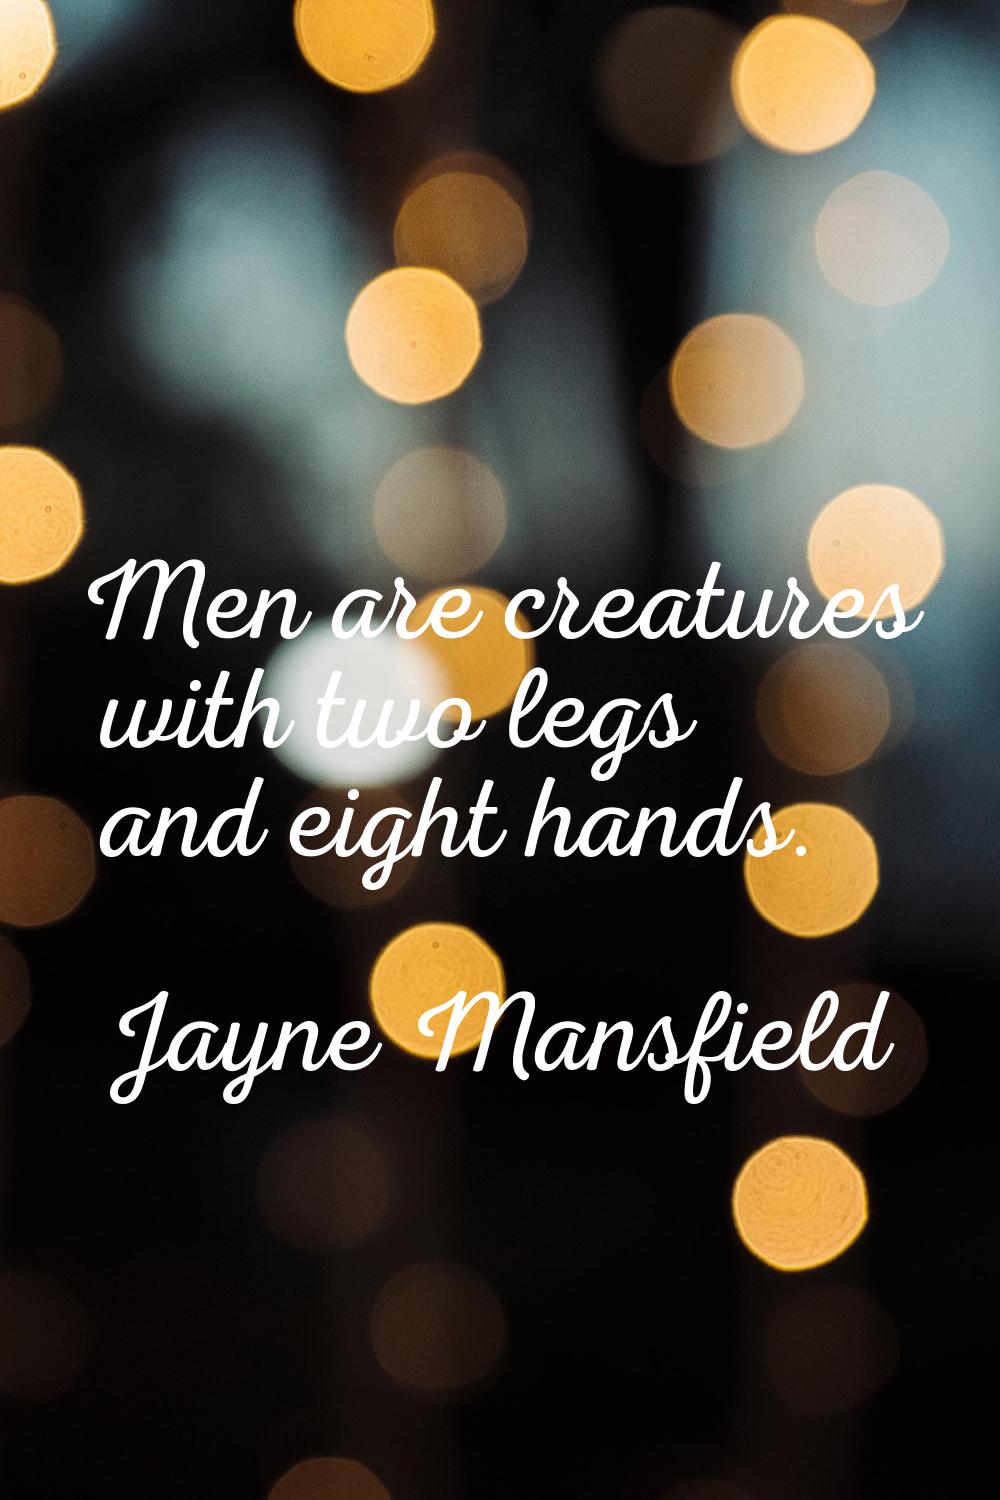 Men are creatures with two legs and eight hands.